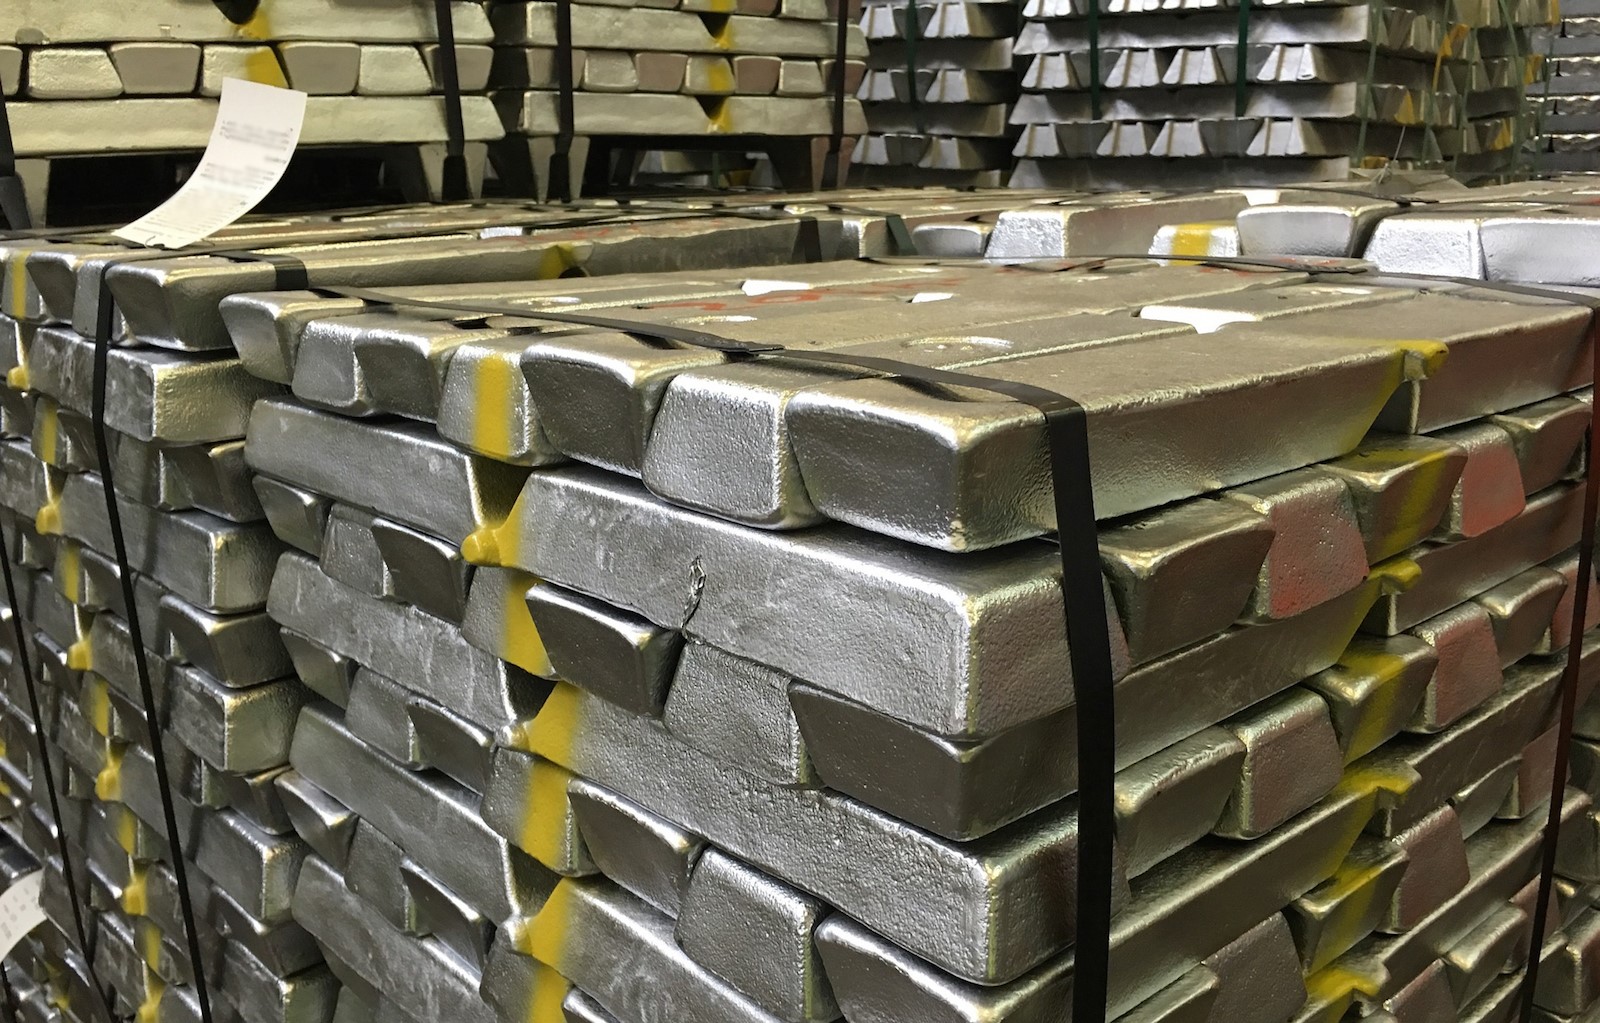 A00 aluminium ingot price closes the week with a hike of RMB90/t; Alumina price slips by RMB2/t